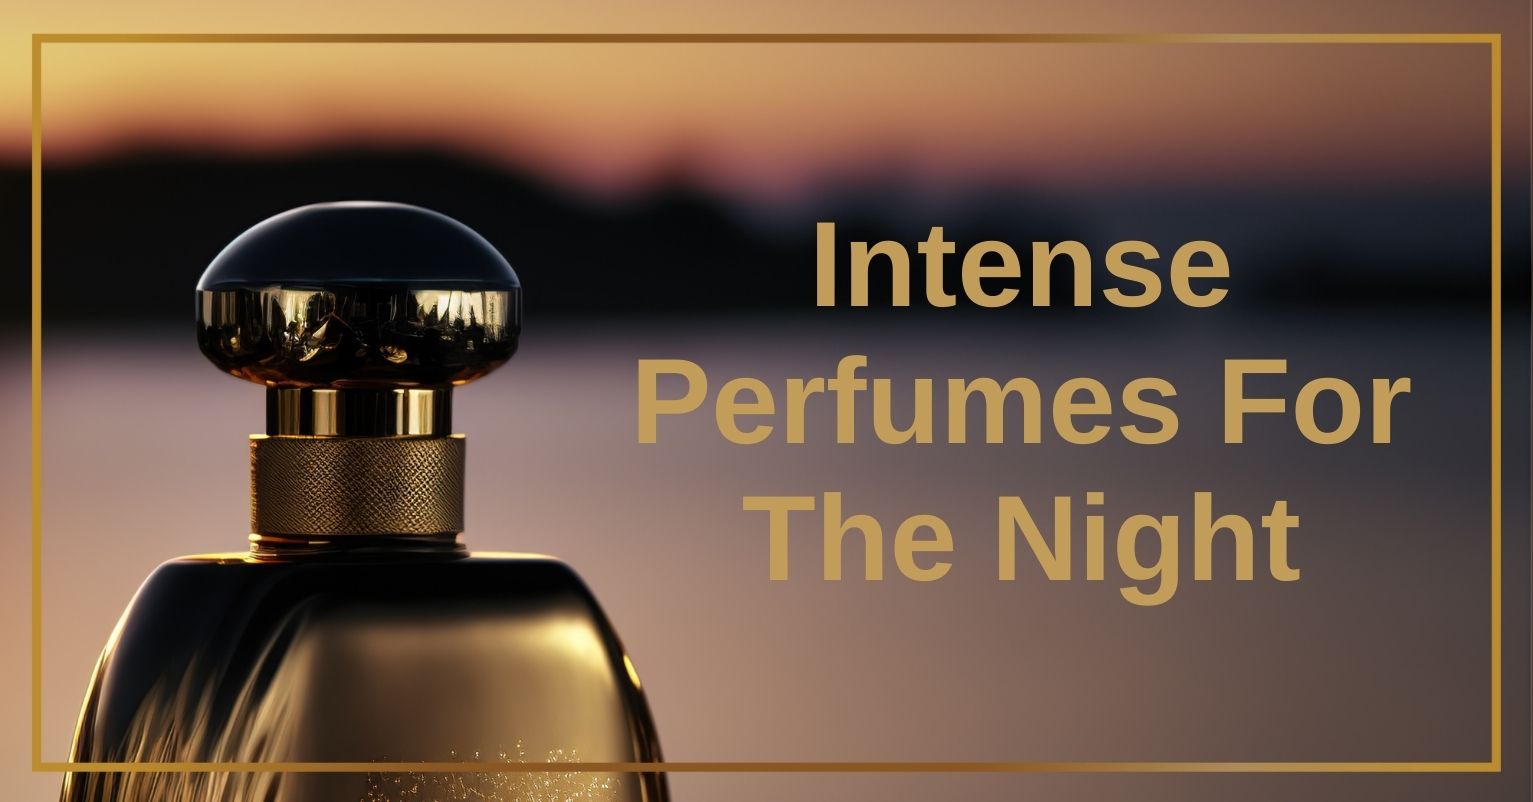 Intense Perfumes For The Night